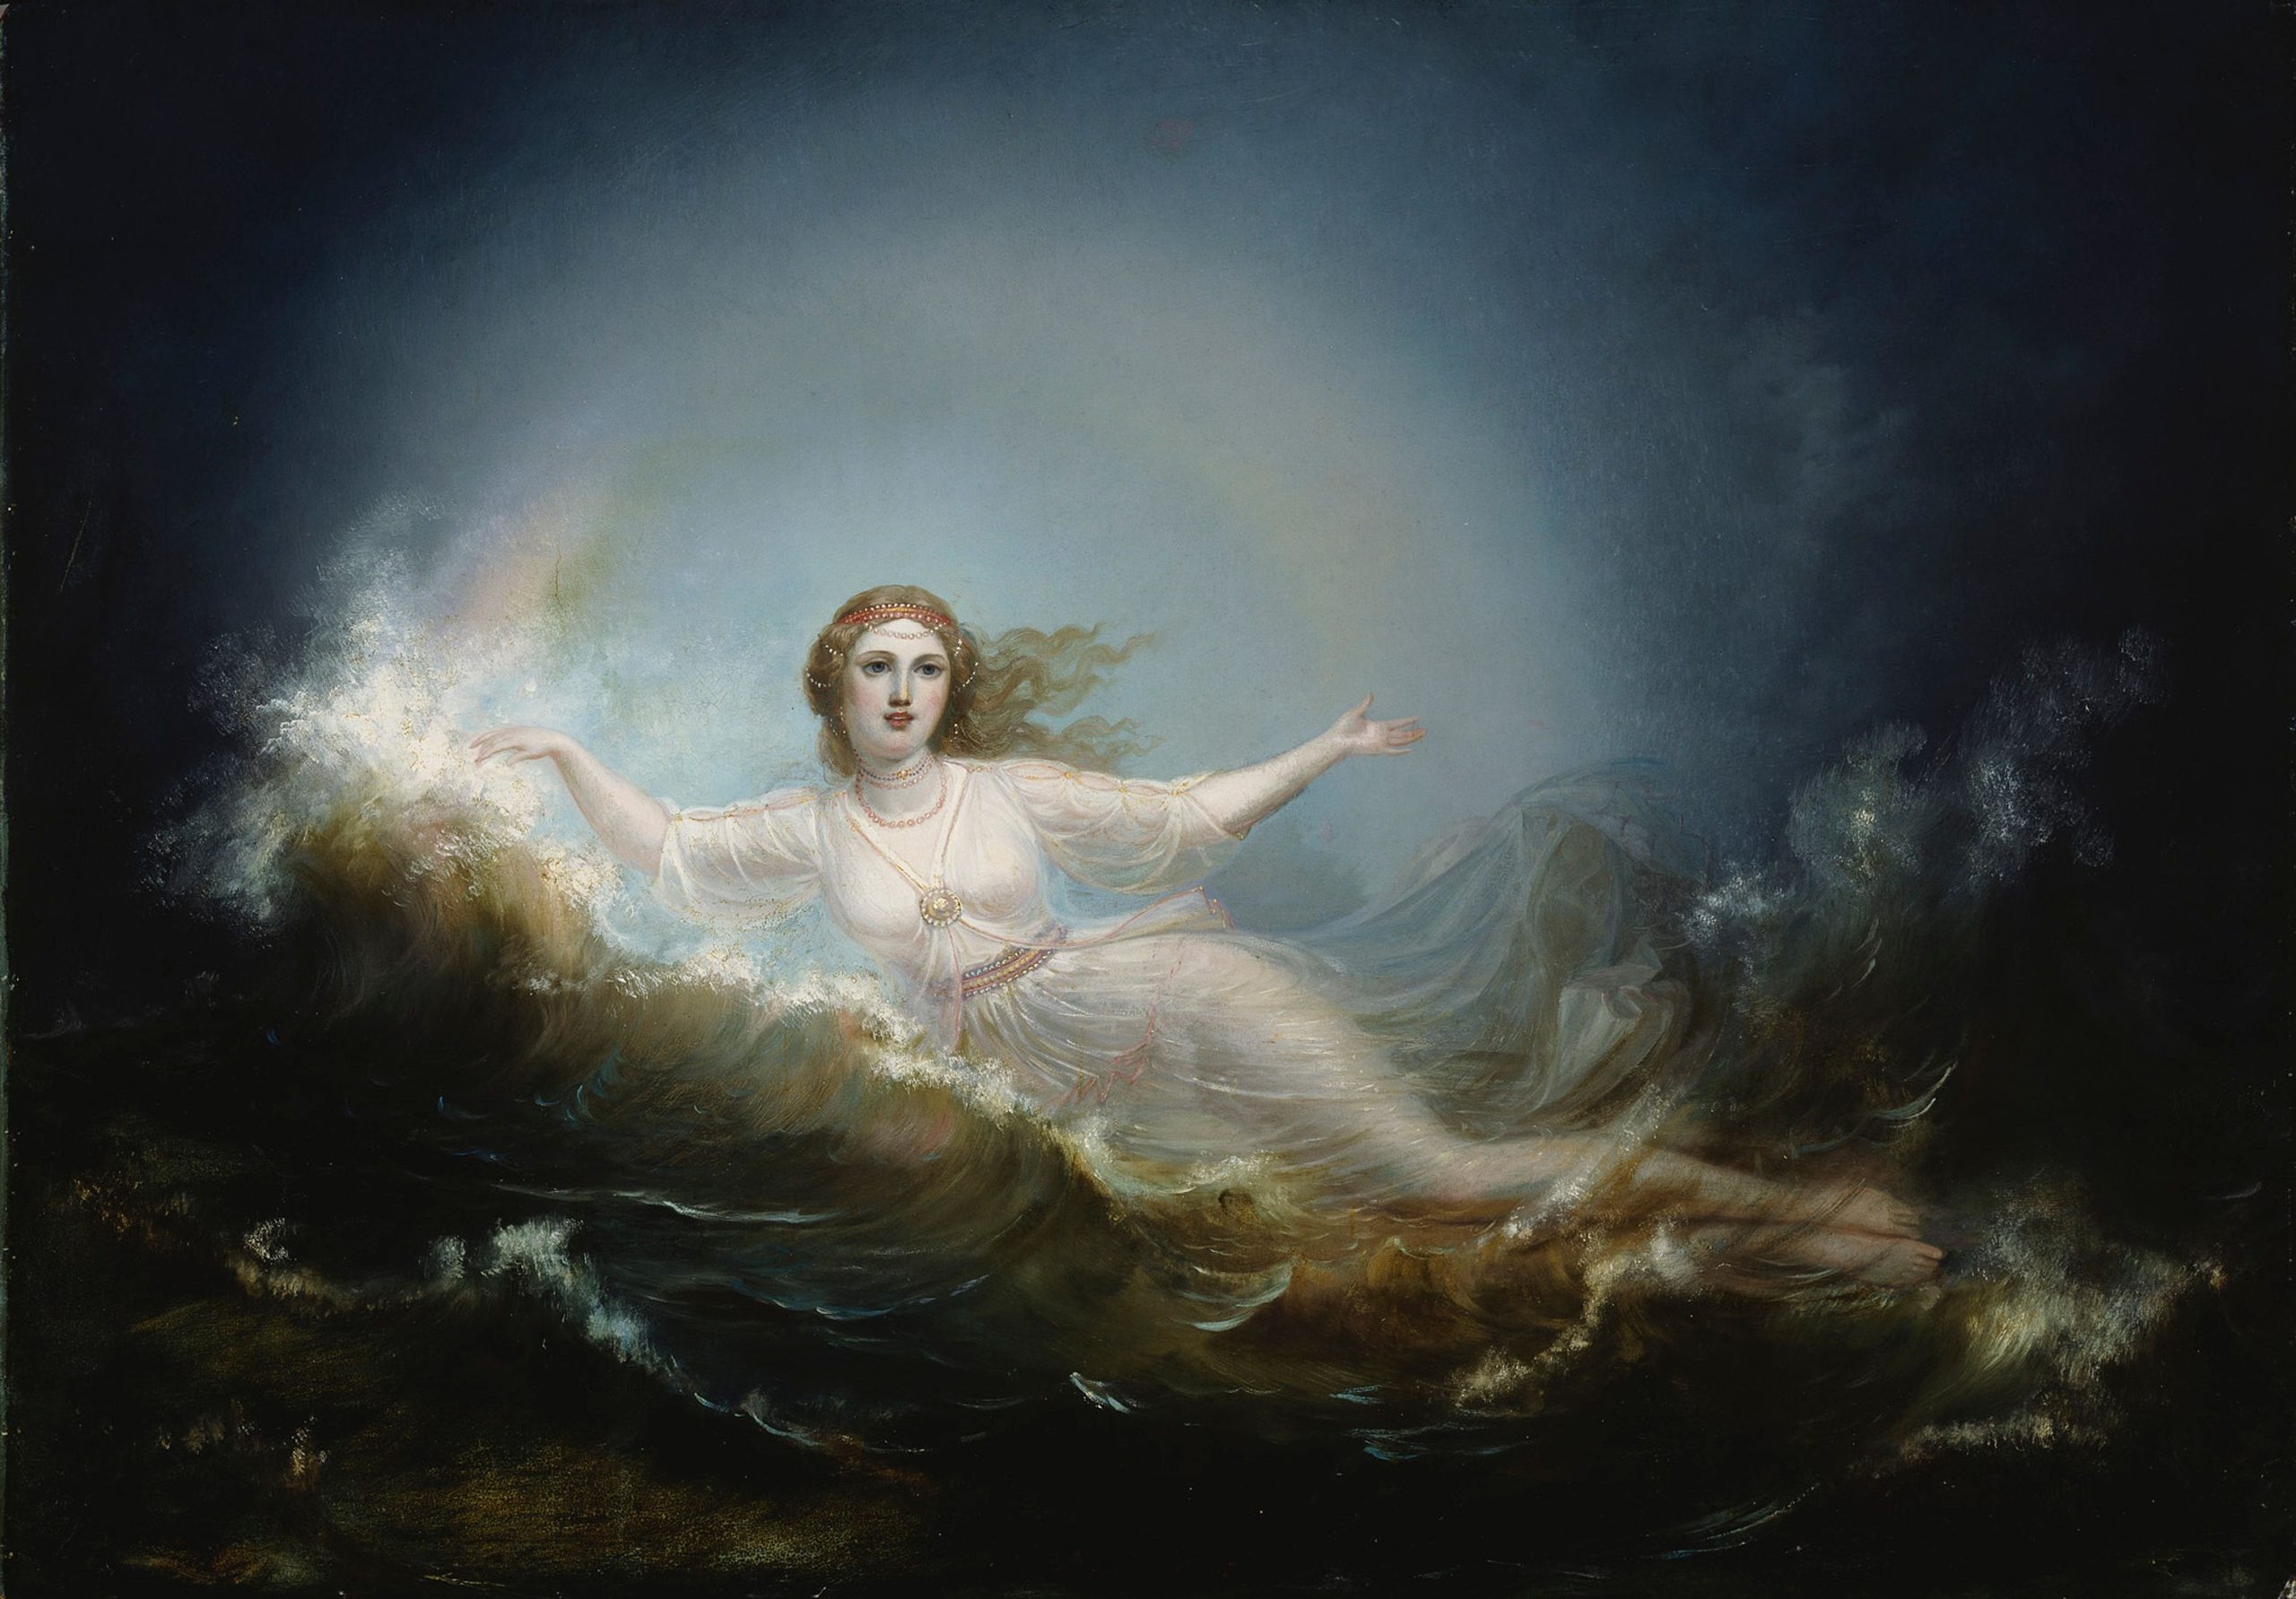 A woman in an inclined position half submerged underwater with arms outstretched to the misty sky